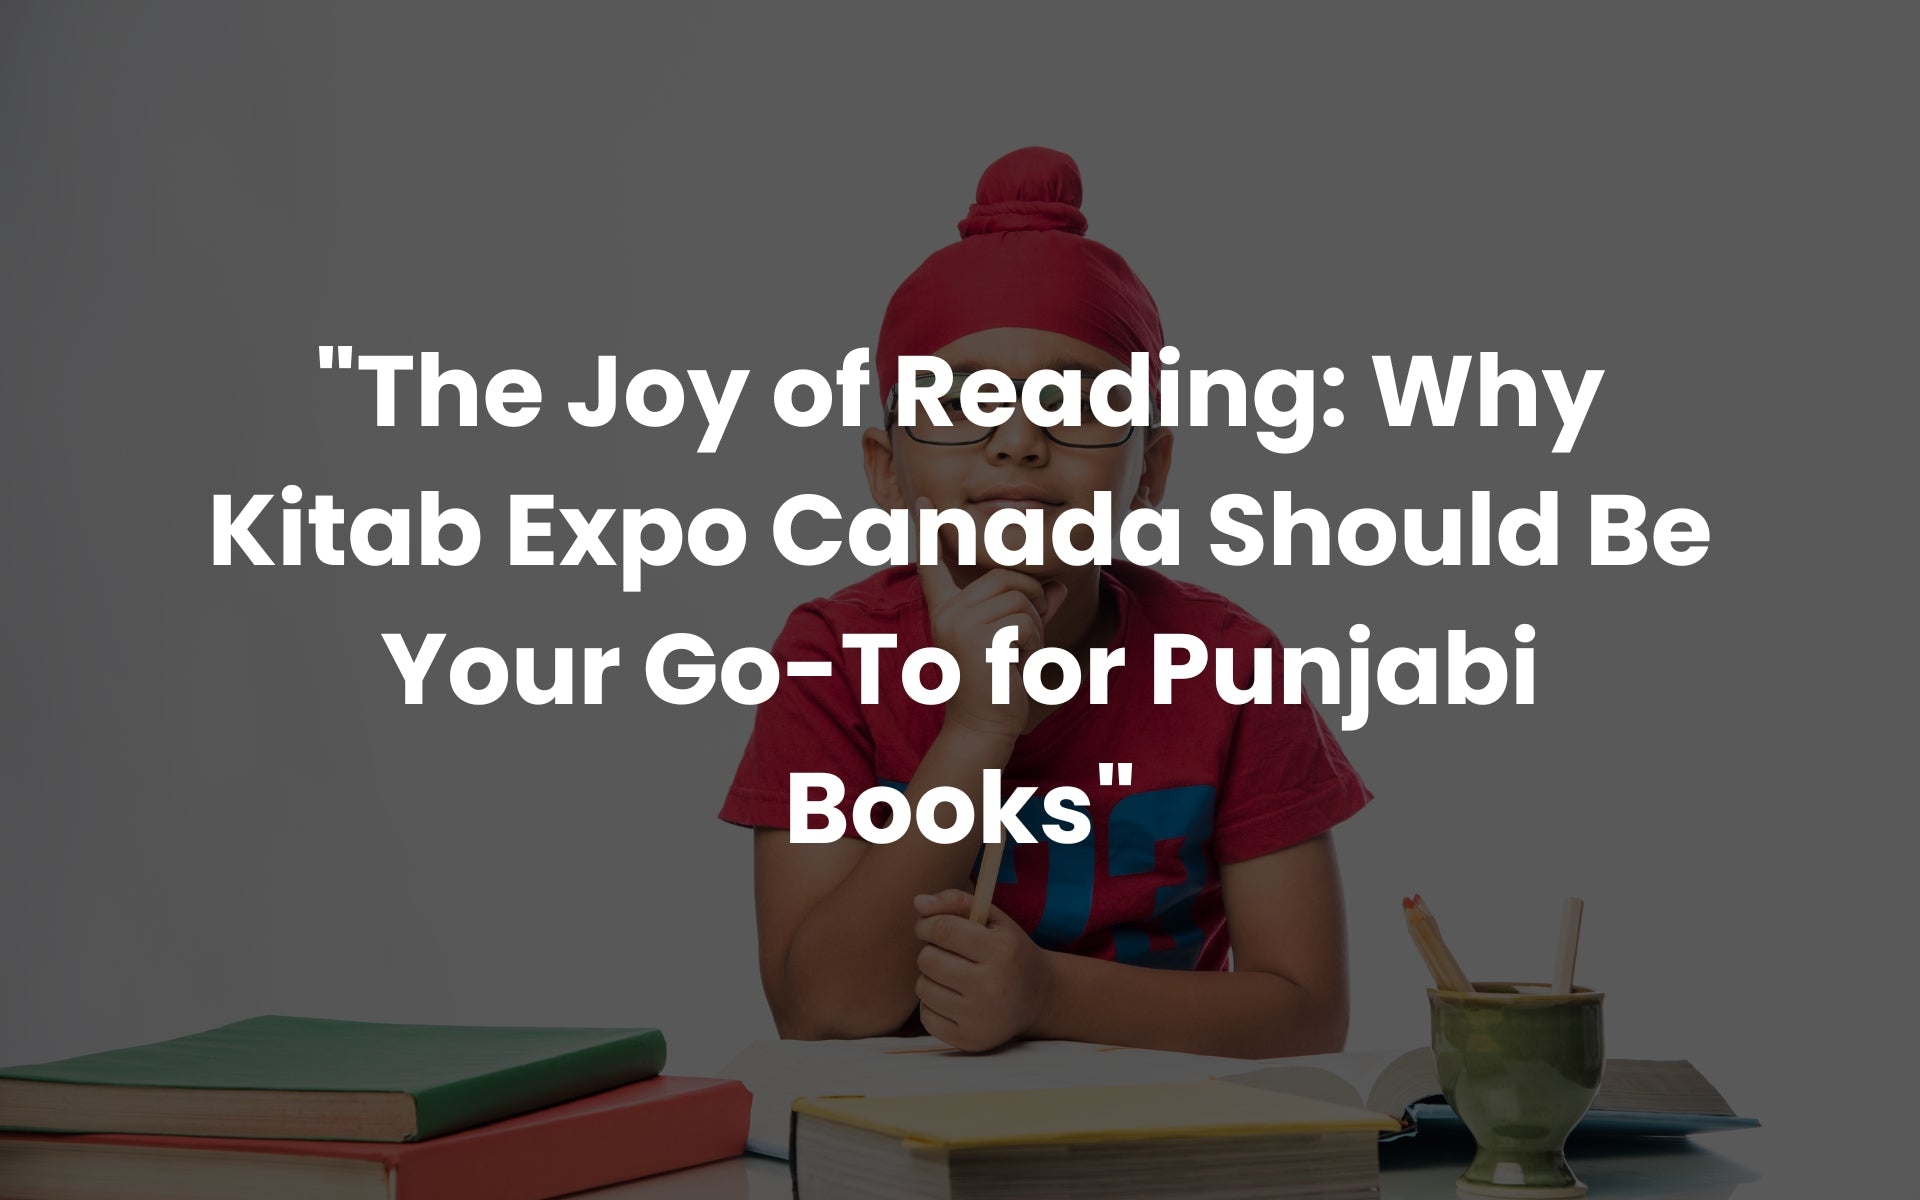 The Joy of Reading: Why Kitab Expo Canada Should Be Your Go-To for Punjabi Books